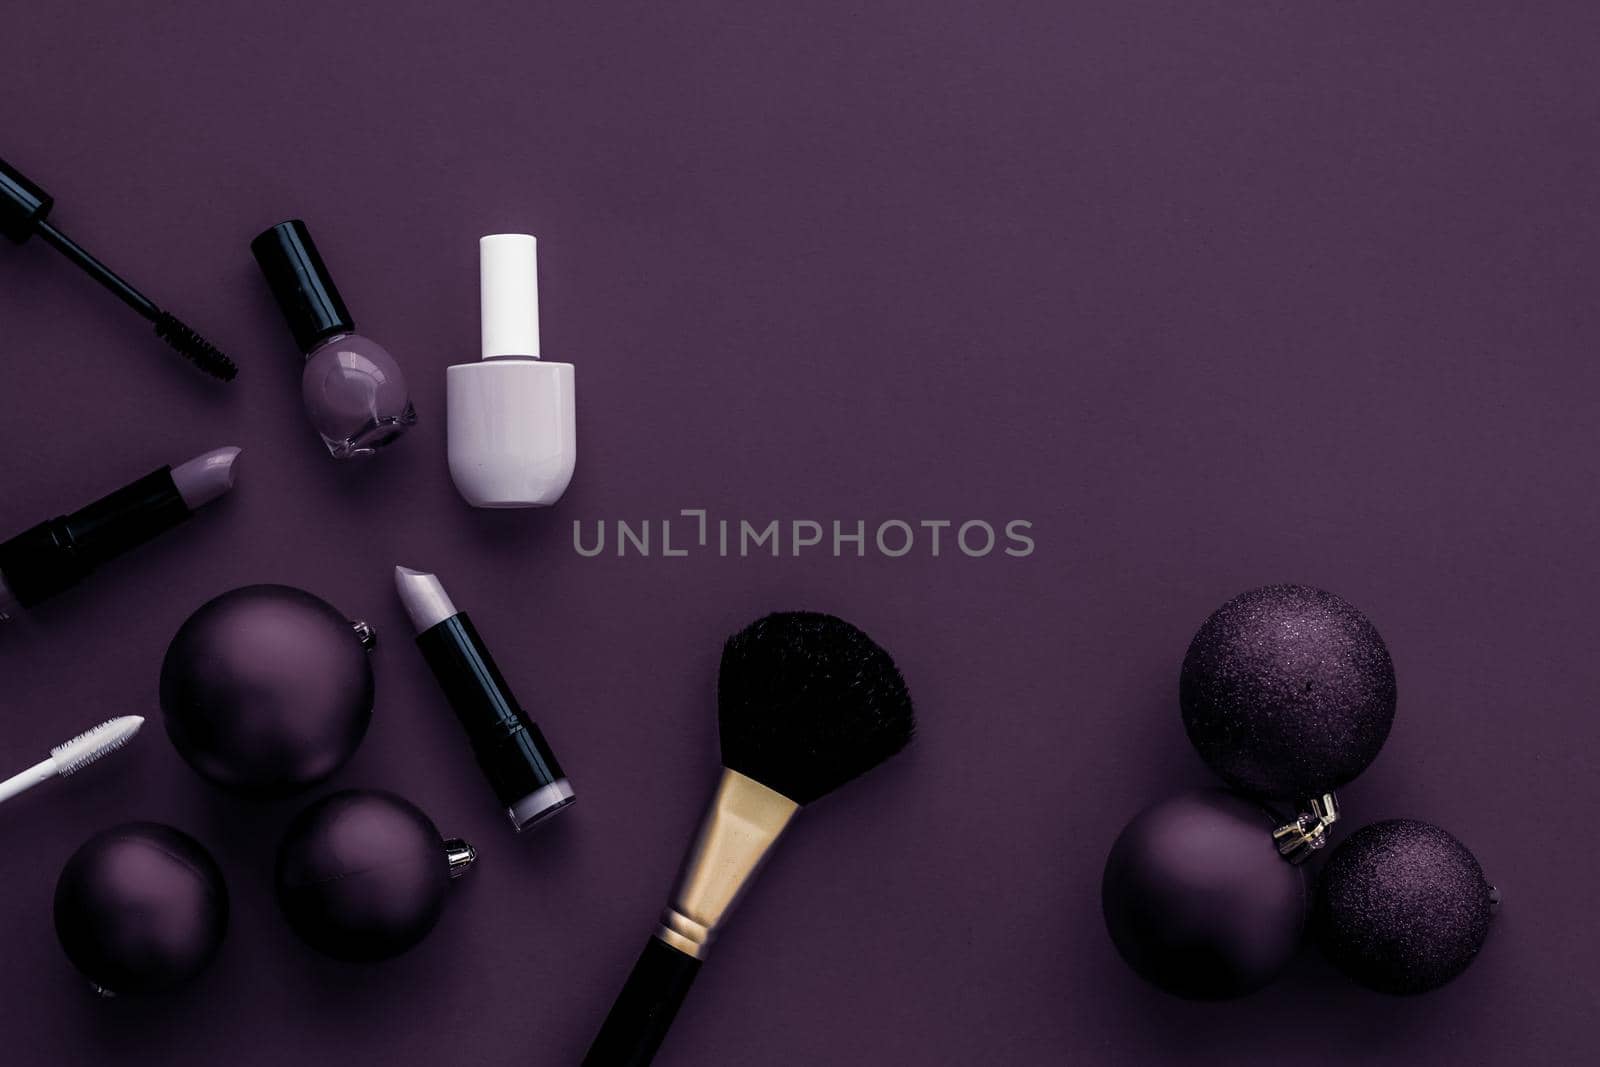 Make-up and cosmetics product set for beauty brand Christmas sale promotion, luxury plum flatlay background as holiday design by Anneleven